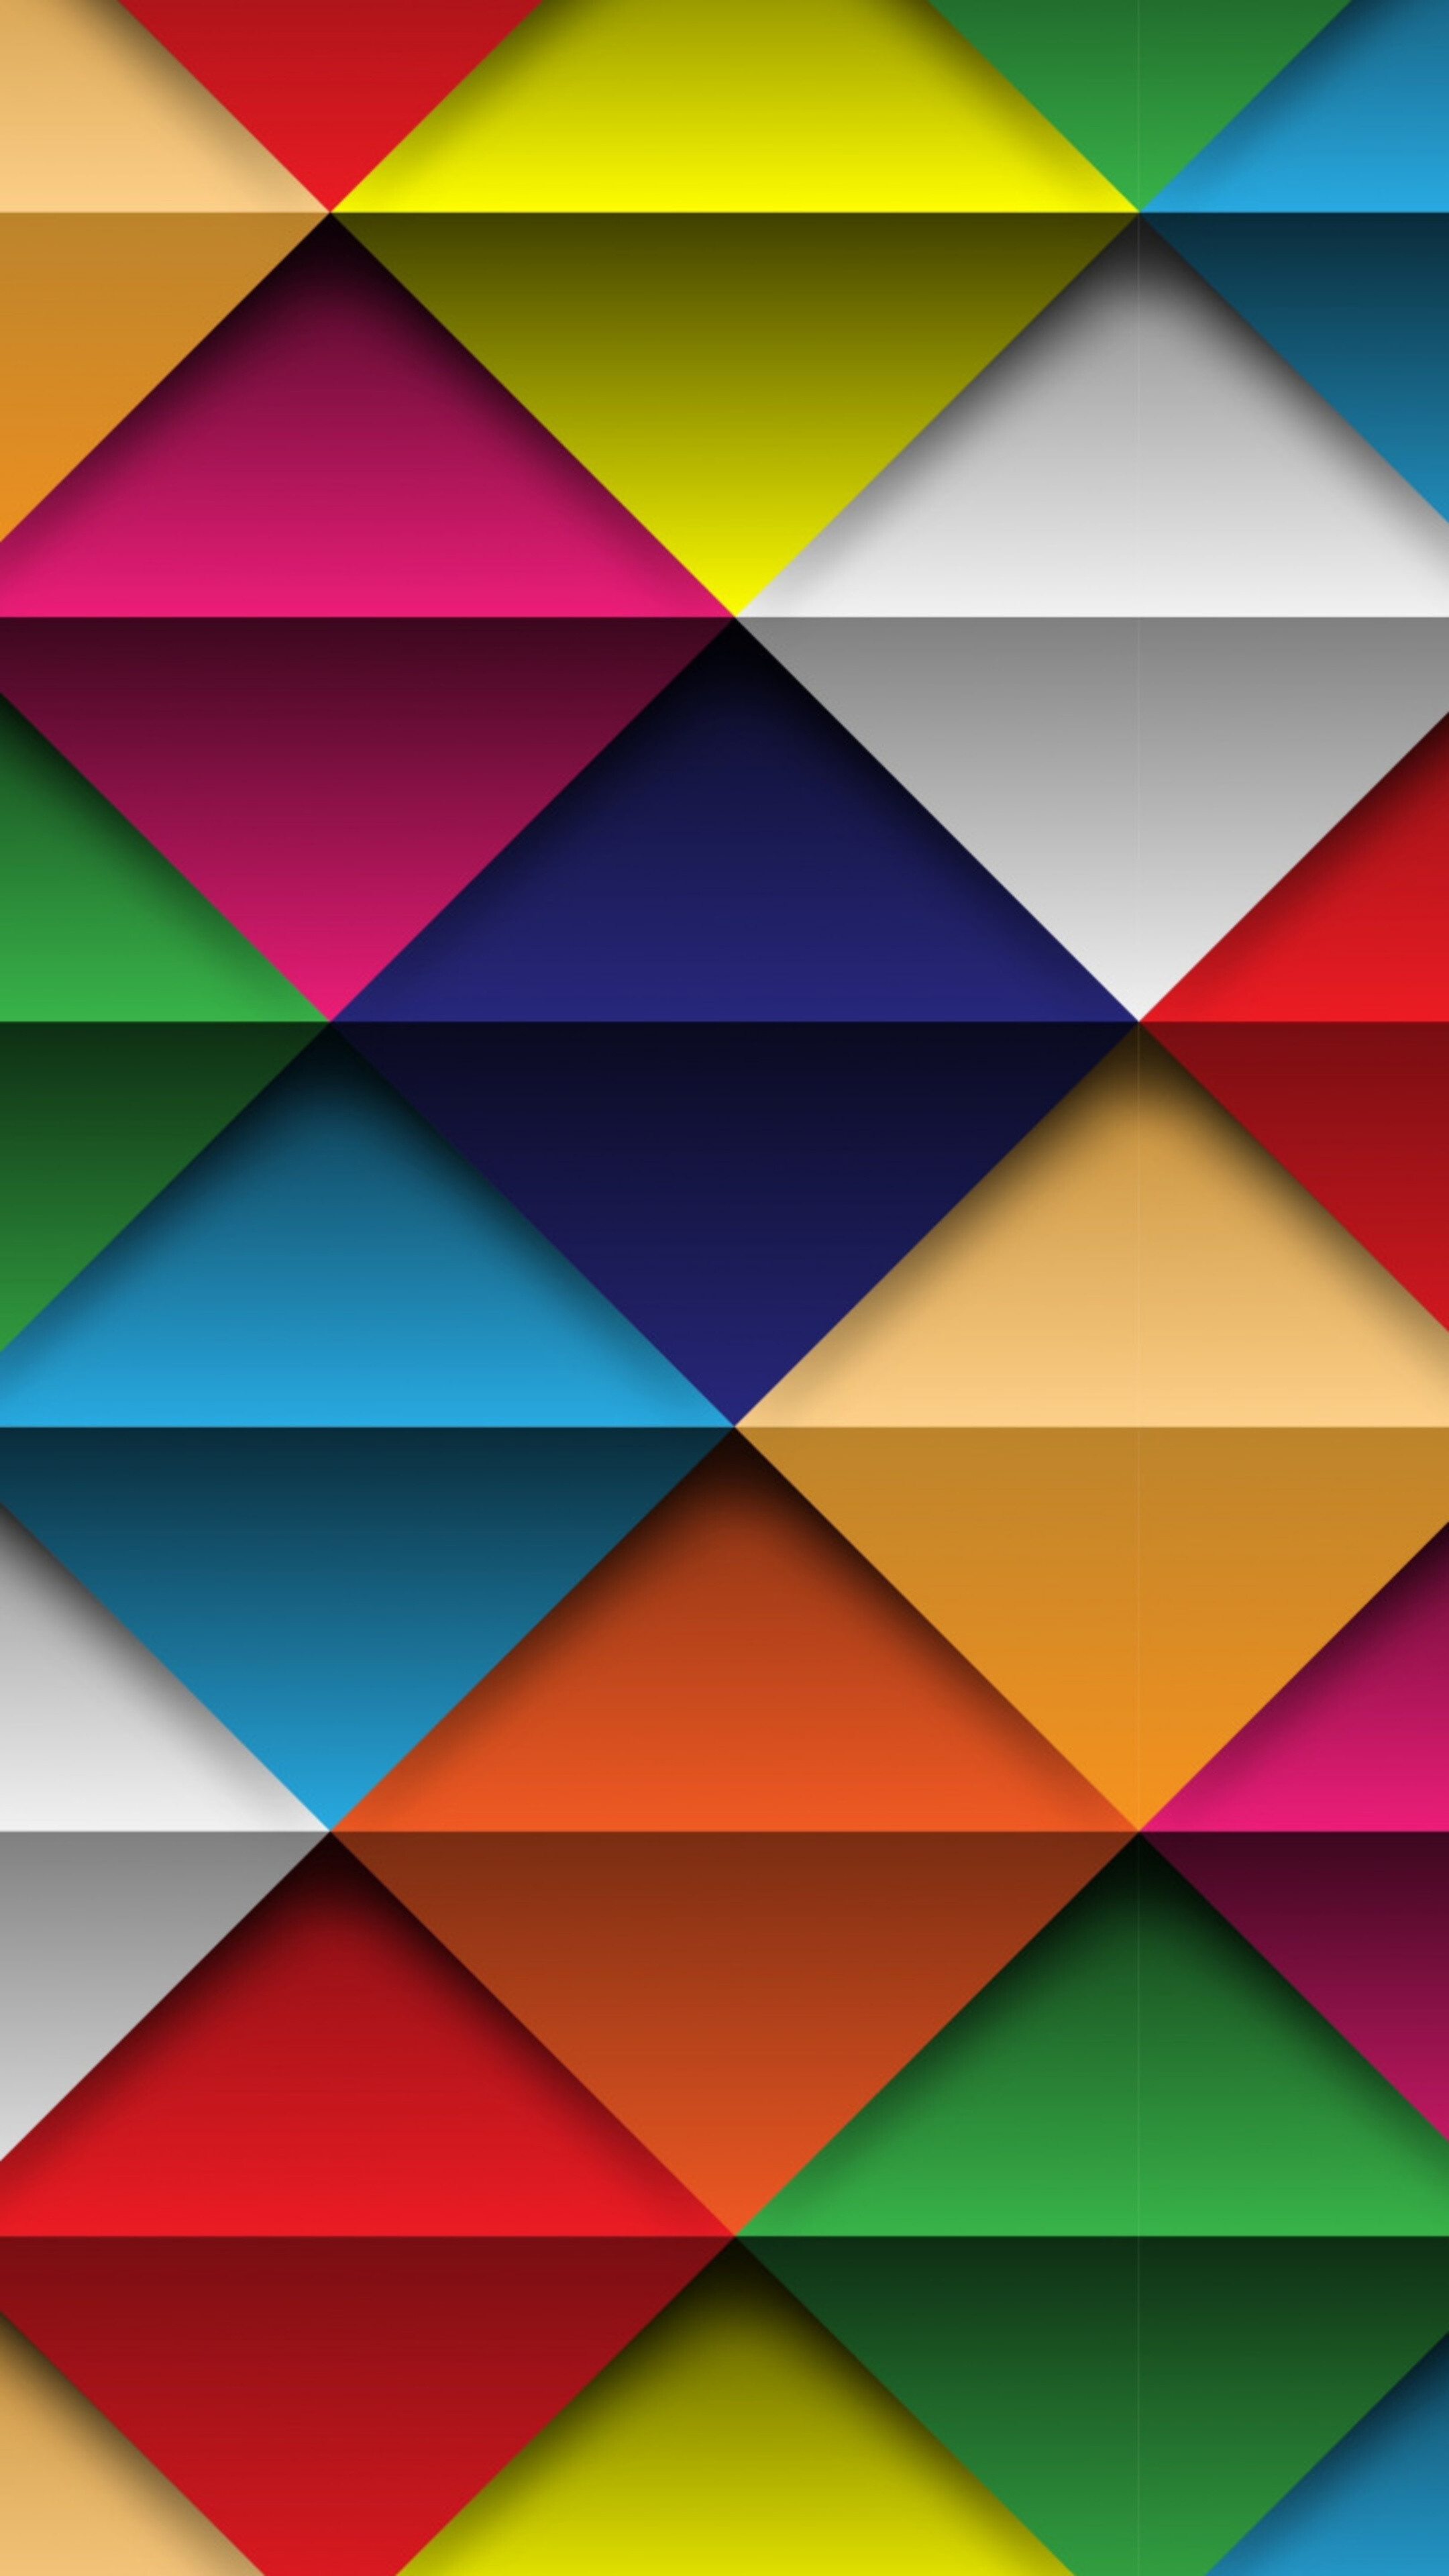 Triangle: Geometric shapes, Abstract, Colorful, Squares. 2160x3840 4K Wallpaper.